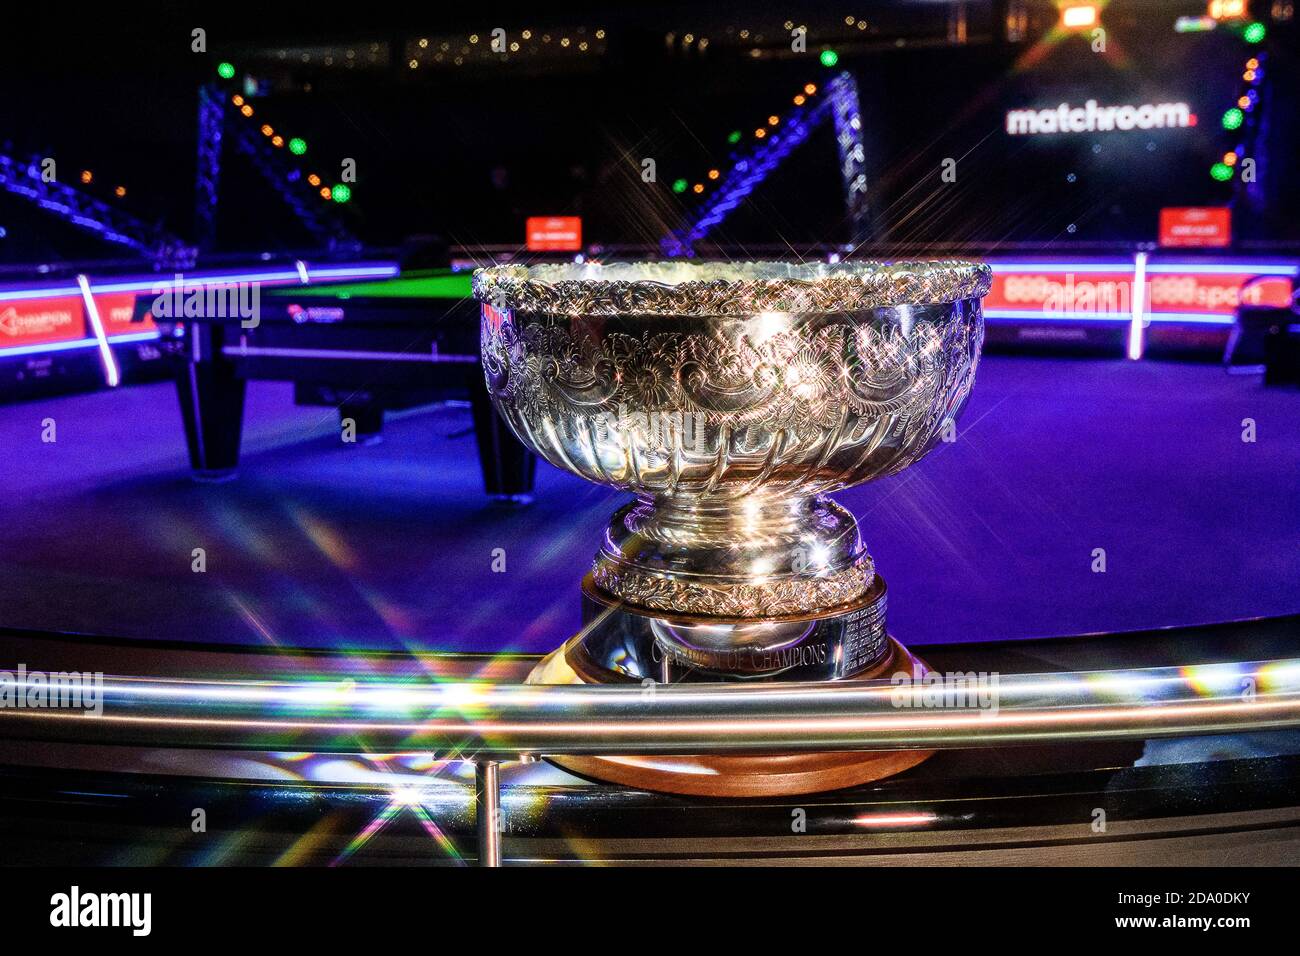 MILTON KEYNES, UNITED KINGDOM. 08th Nov, 2020. The Champion of Champions  Snooker Trophy is displayed during 2020 888Sport Champion of Champions  Snooker Final at Marshall Arena on Sunday, November 08, 2020 in